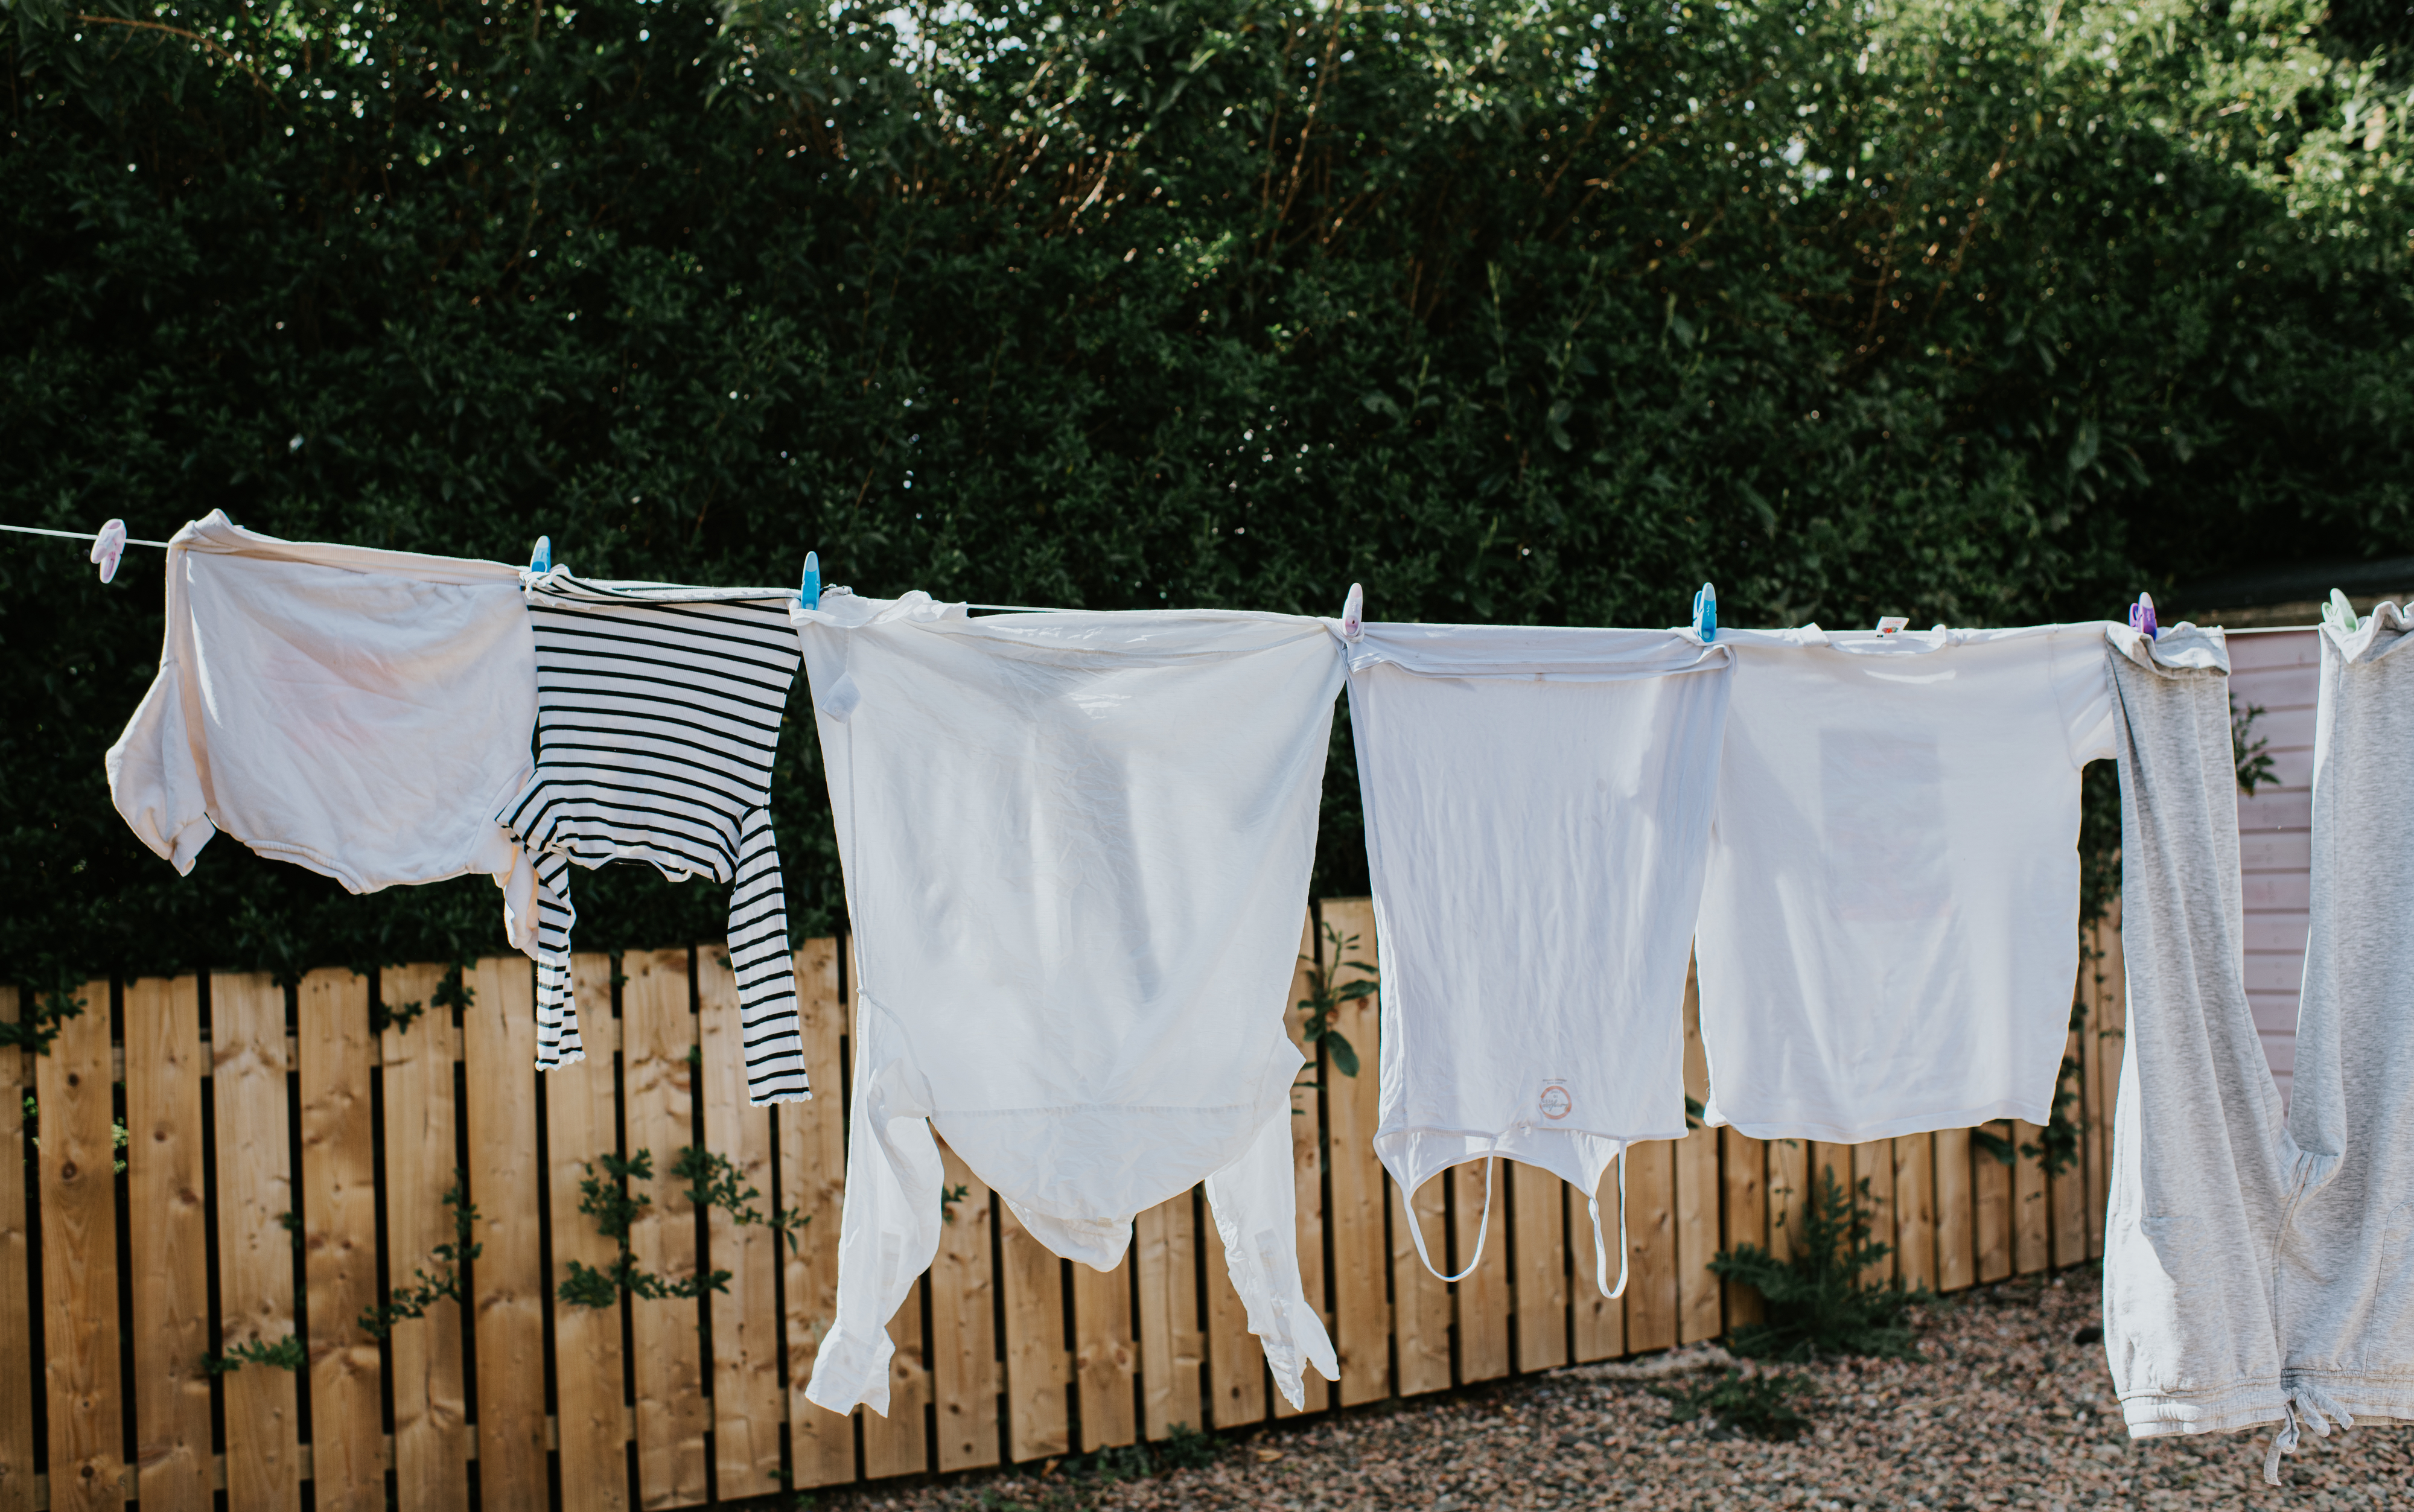 Laundry including shirts and pants hung on a line to dry in a backyard setting